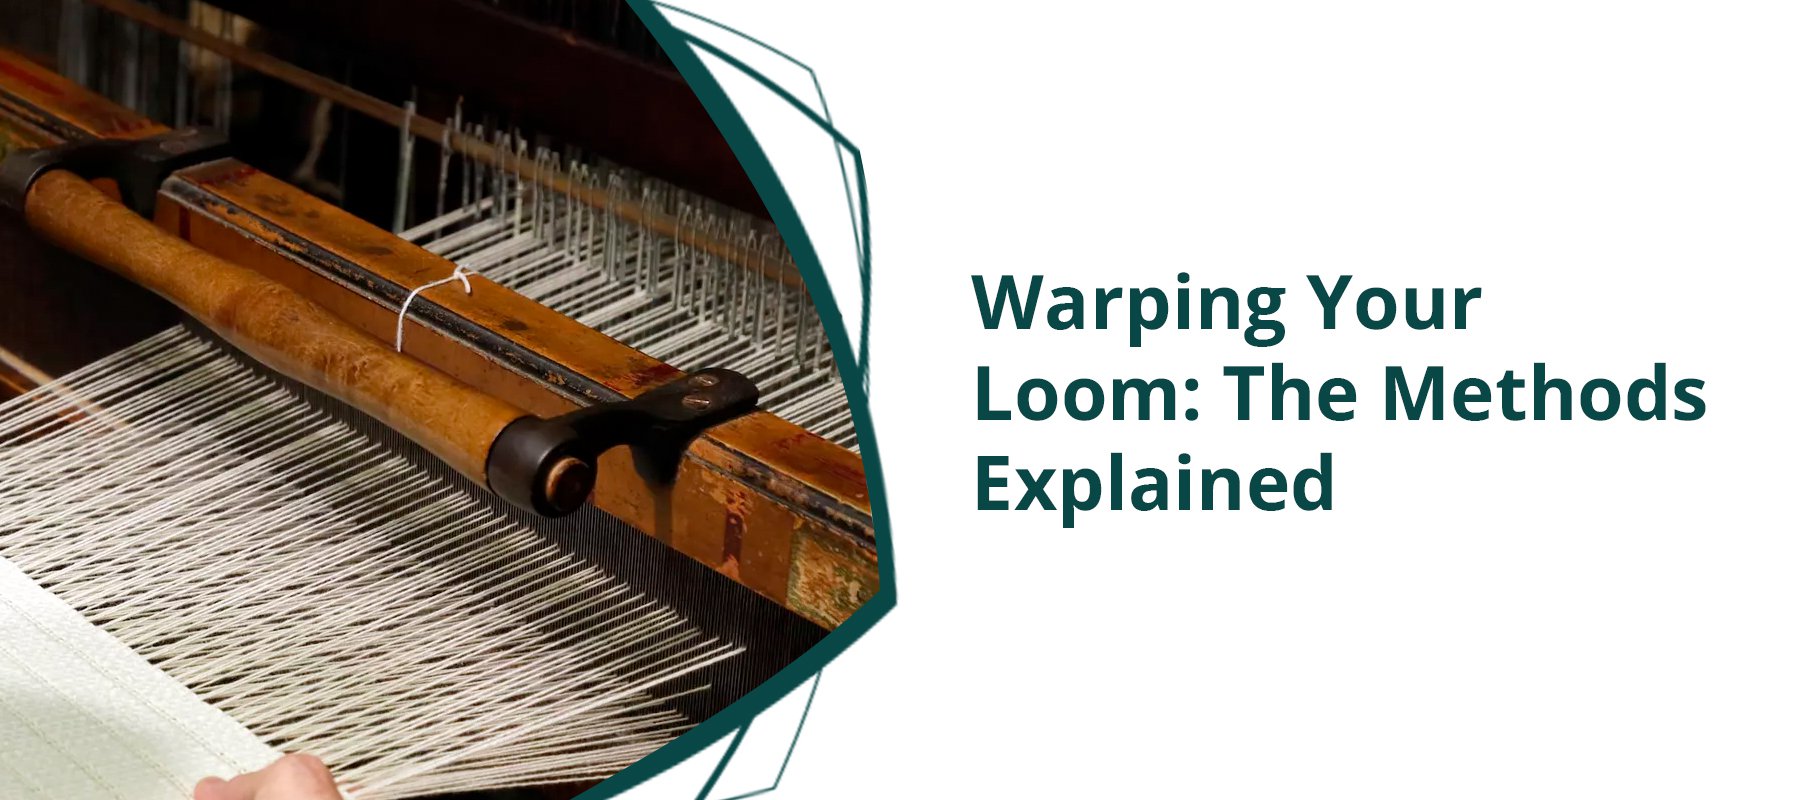 Warping Your Loom: The Different Methods Explained